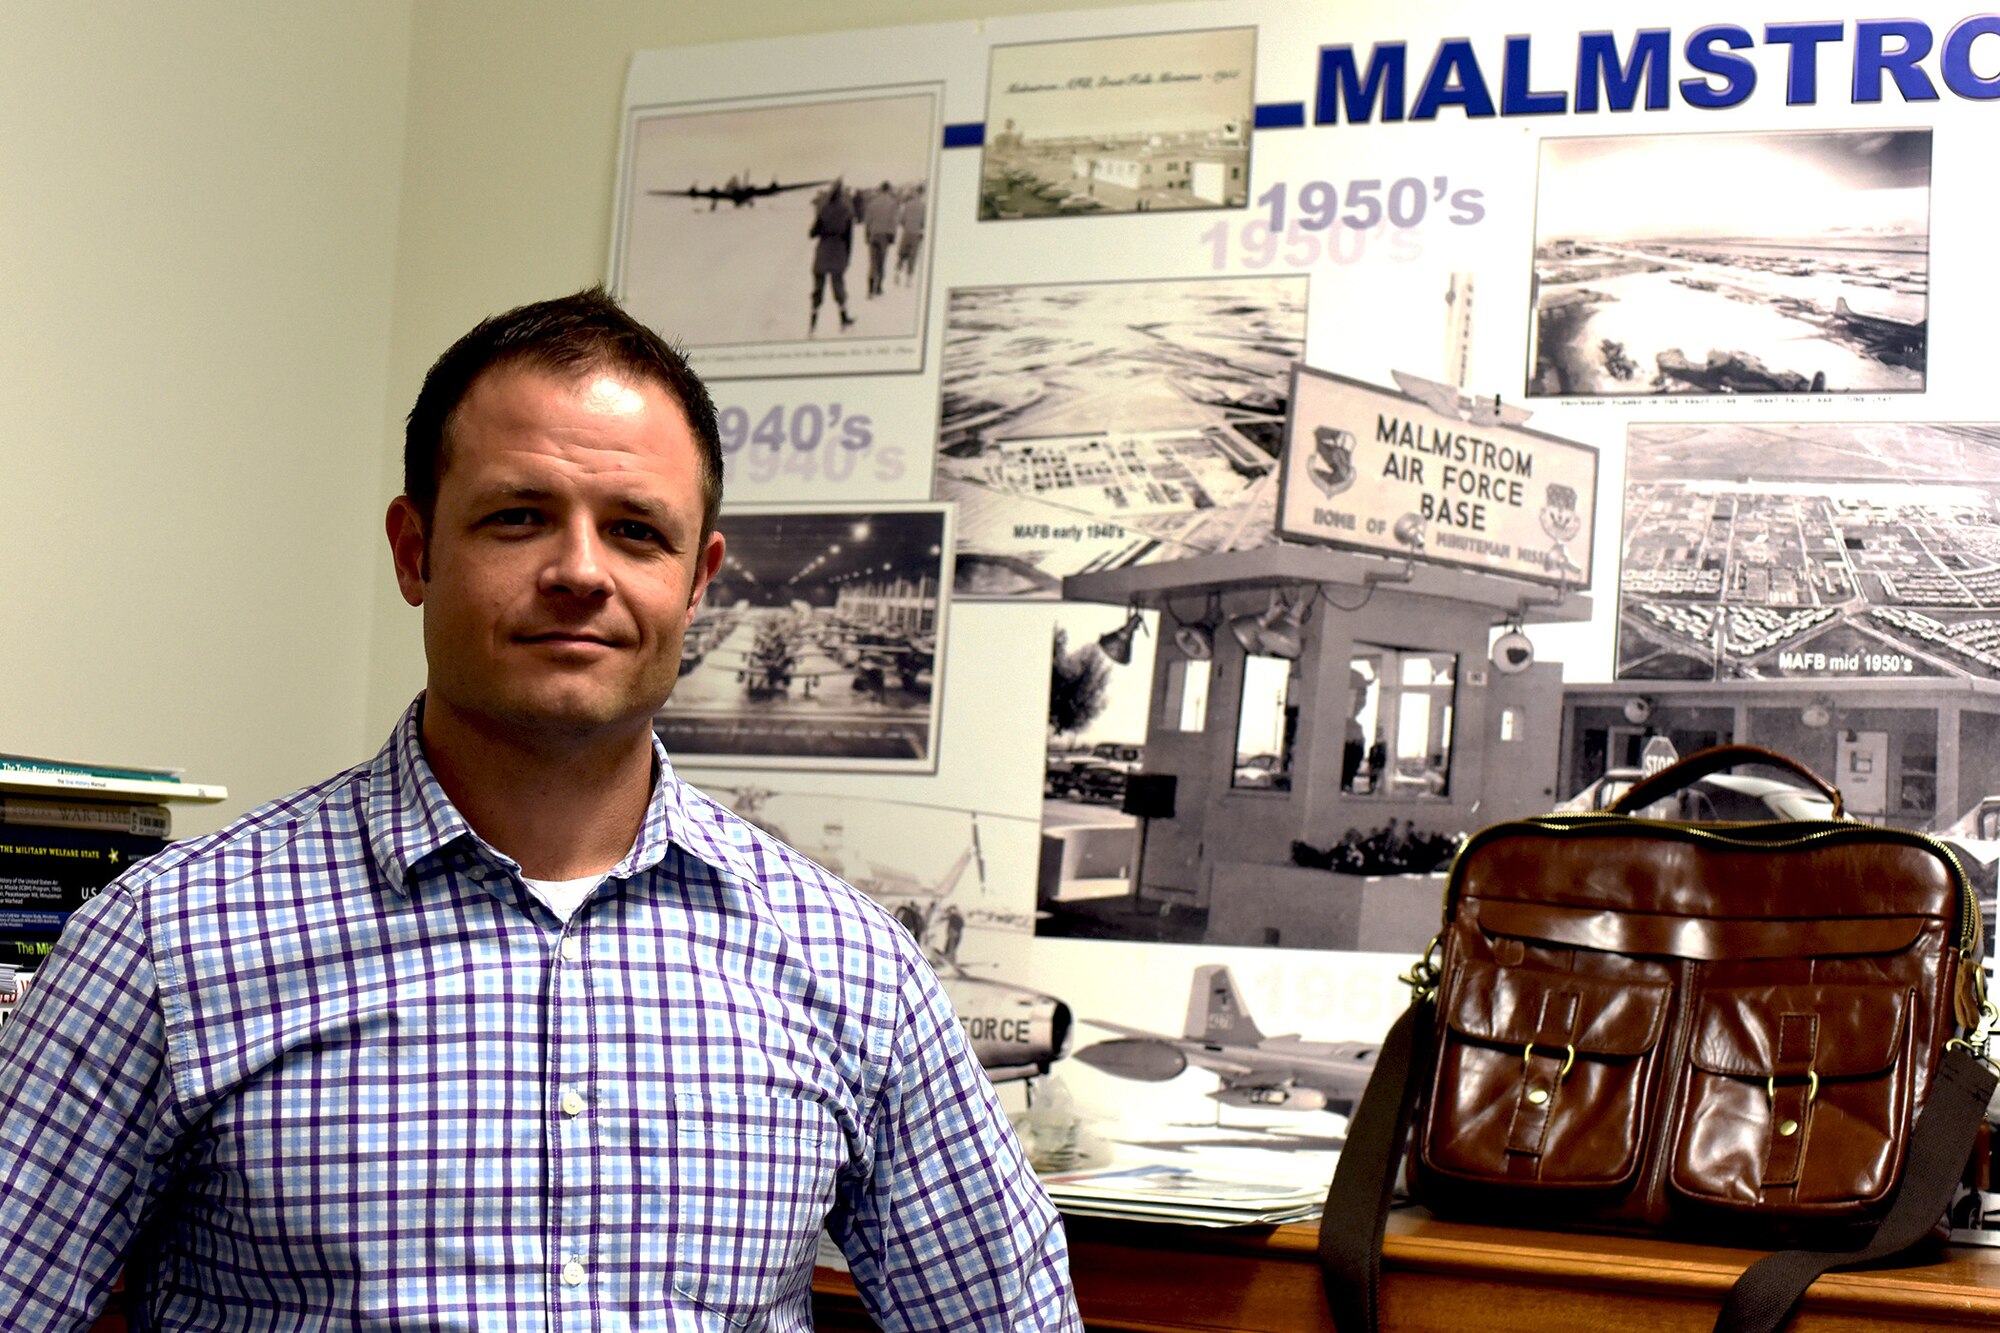 Troy Hallsell, 341st Missile Wing historian, poses next to books and posters in the historian’s office at the 341st Missile Wing headquarters building August 7, 2018, at Malmstrom Air Force Base, Mont. Hallsell has taken up residence as the new base historian. (U.S. Air Force photo by Kiersten McCutchan)